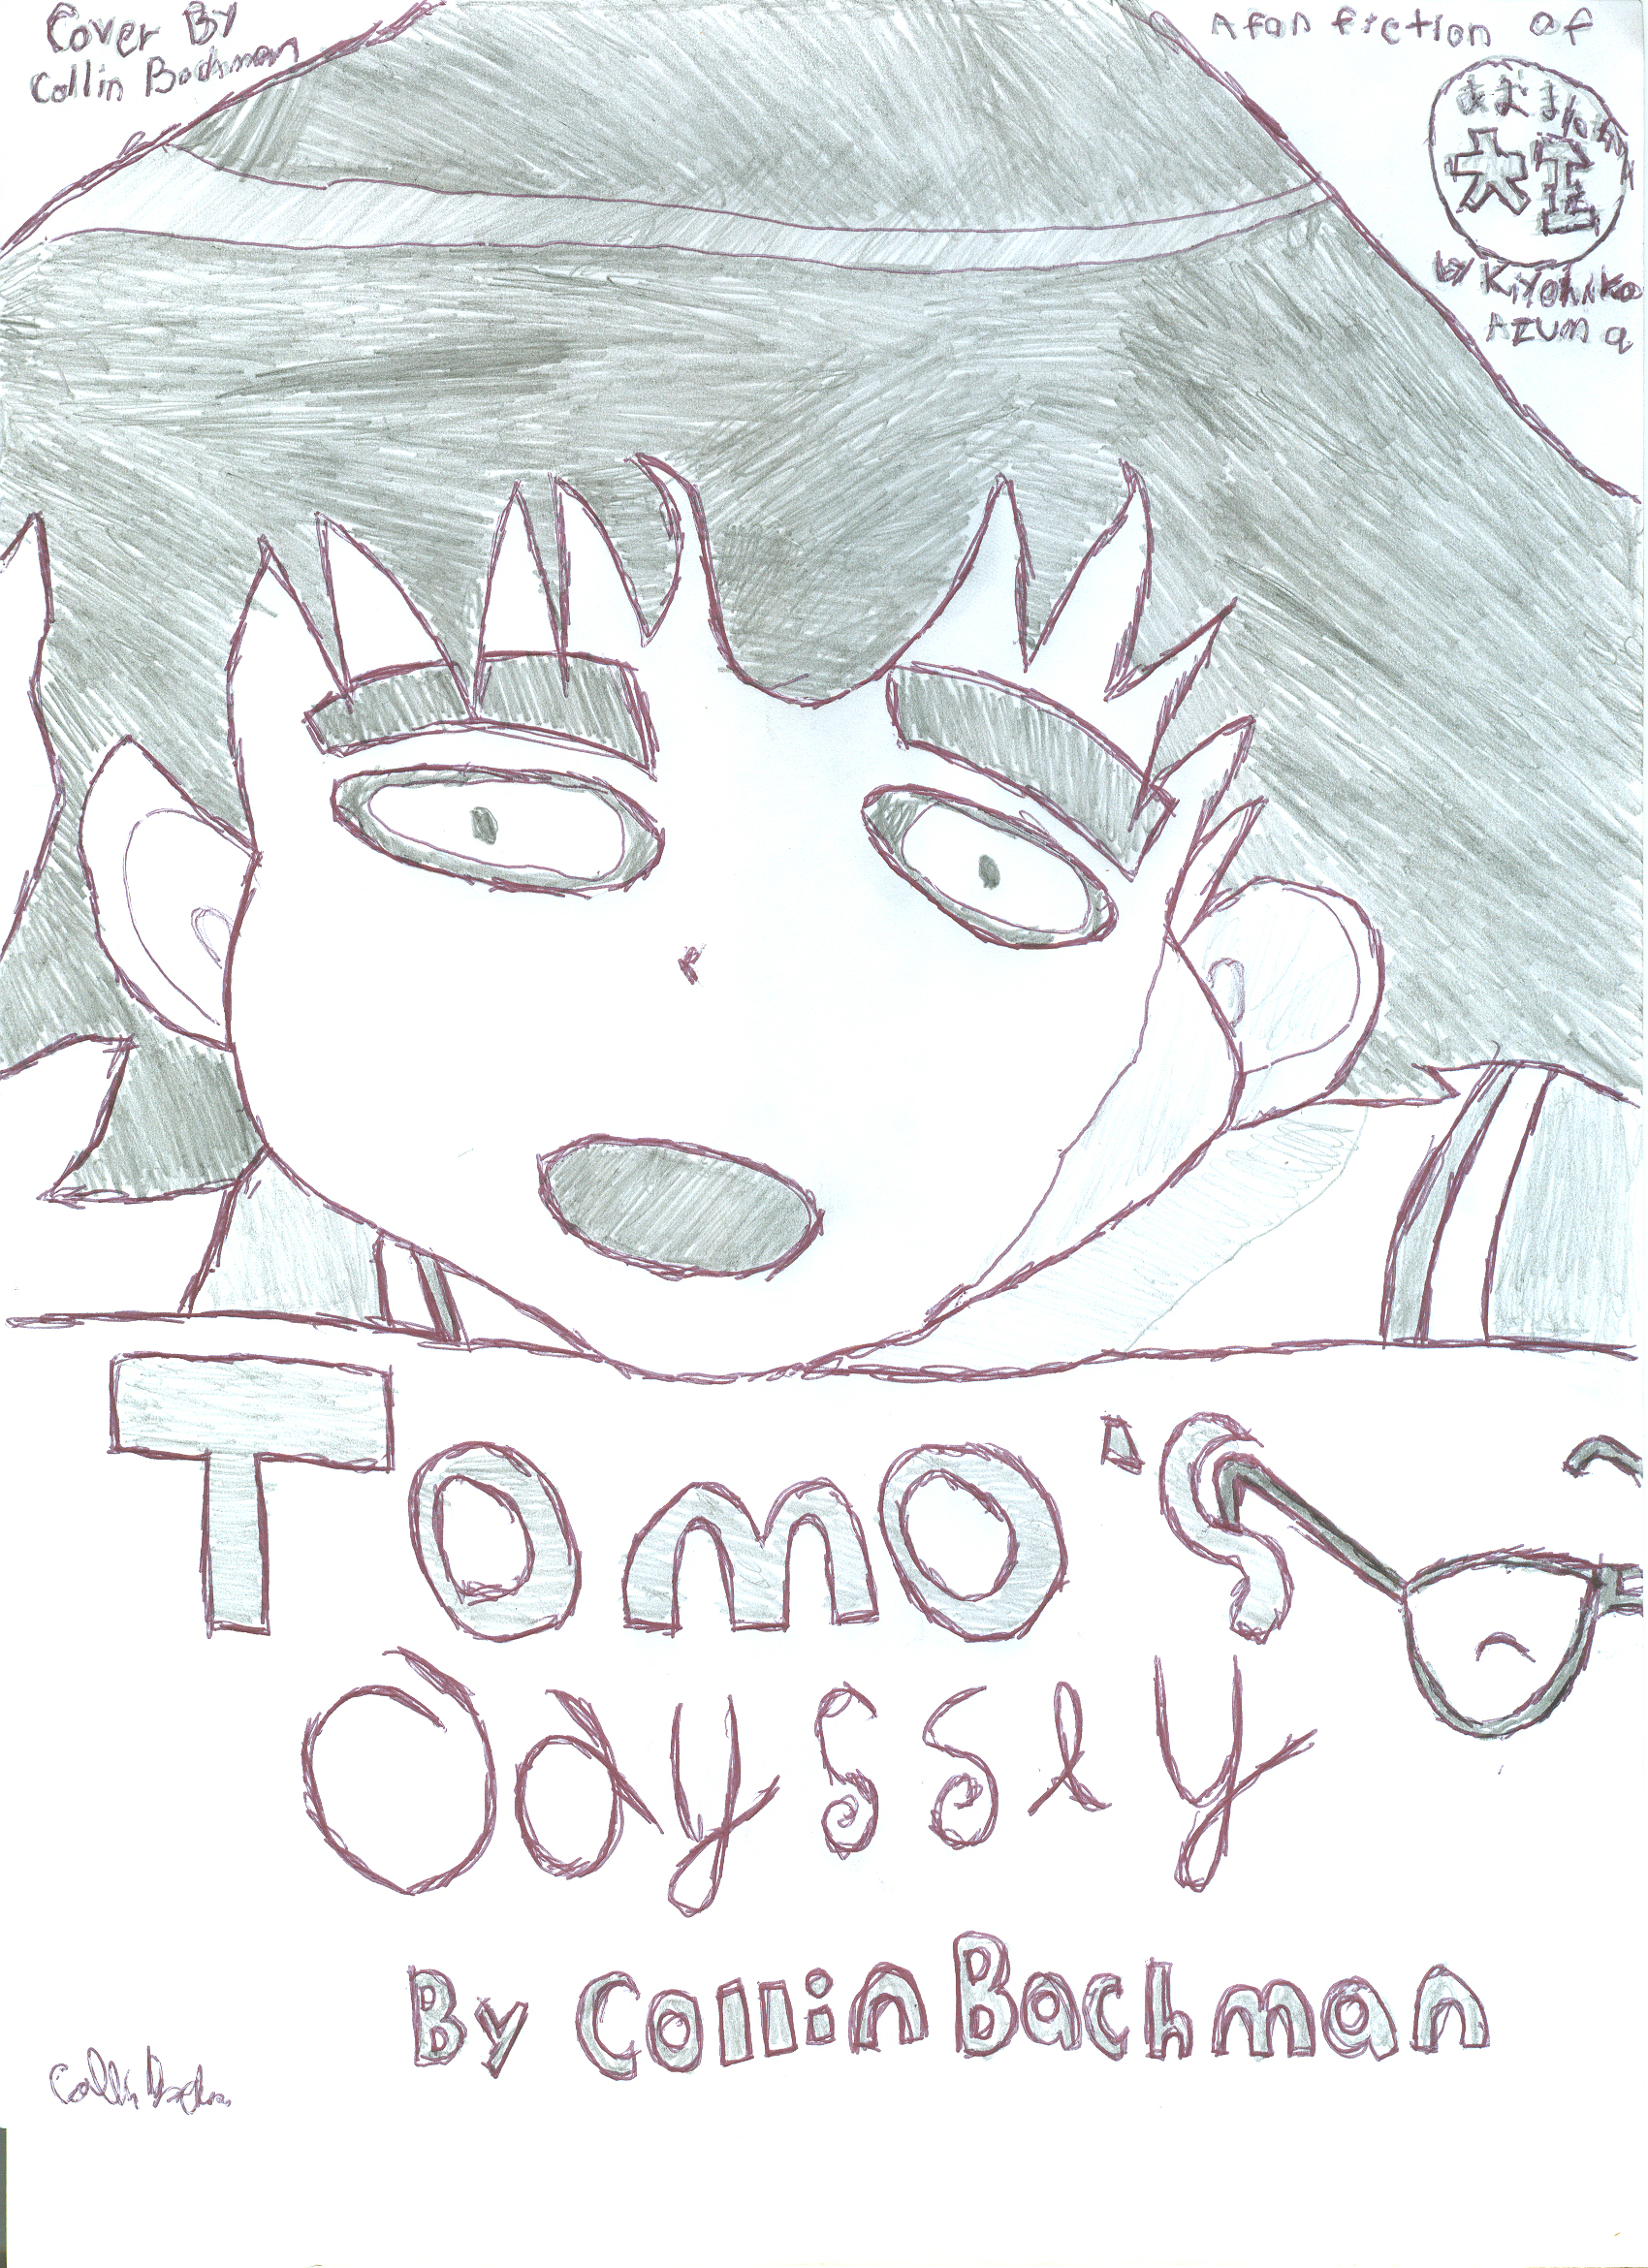 Tomo's Odyssey (Fan Fiction Cover) by oppdis